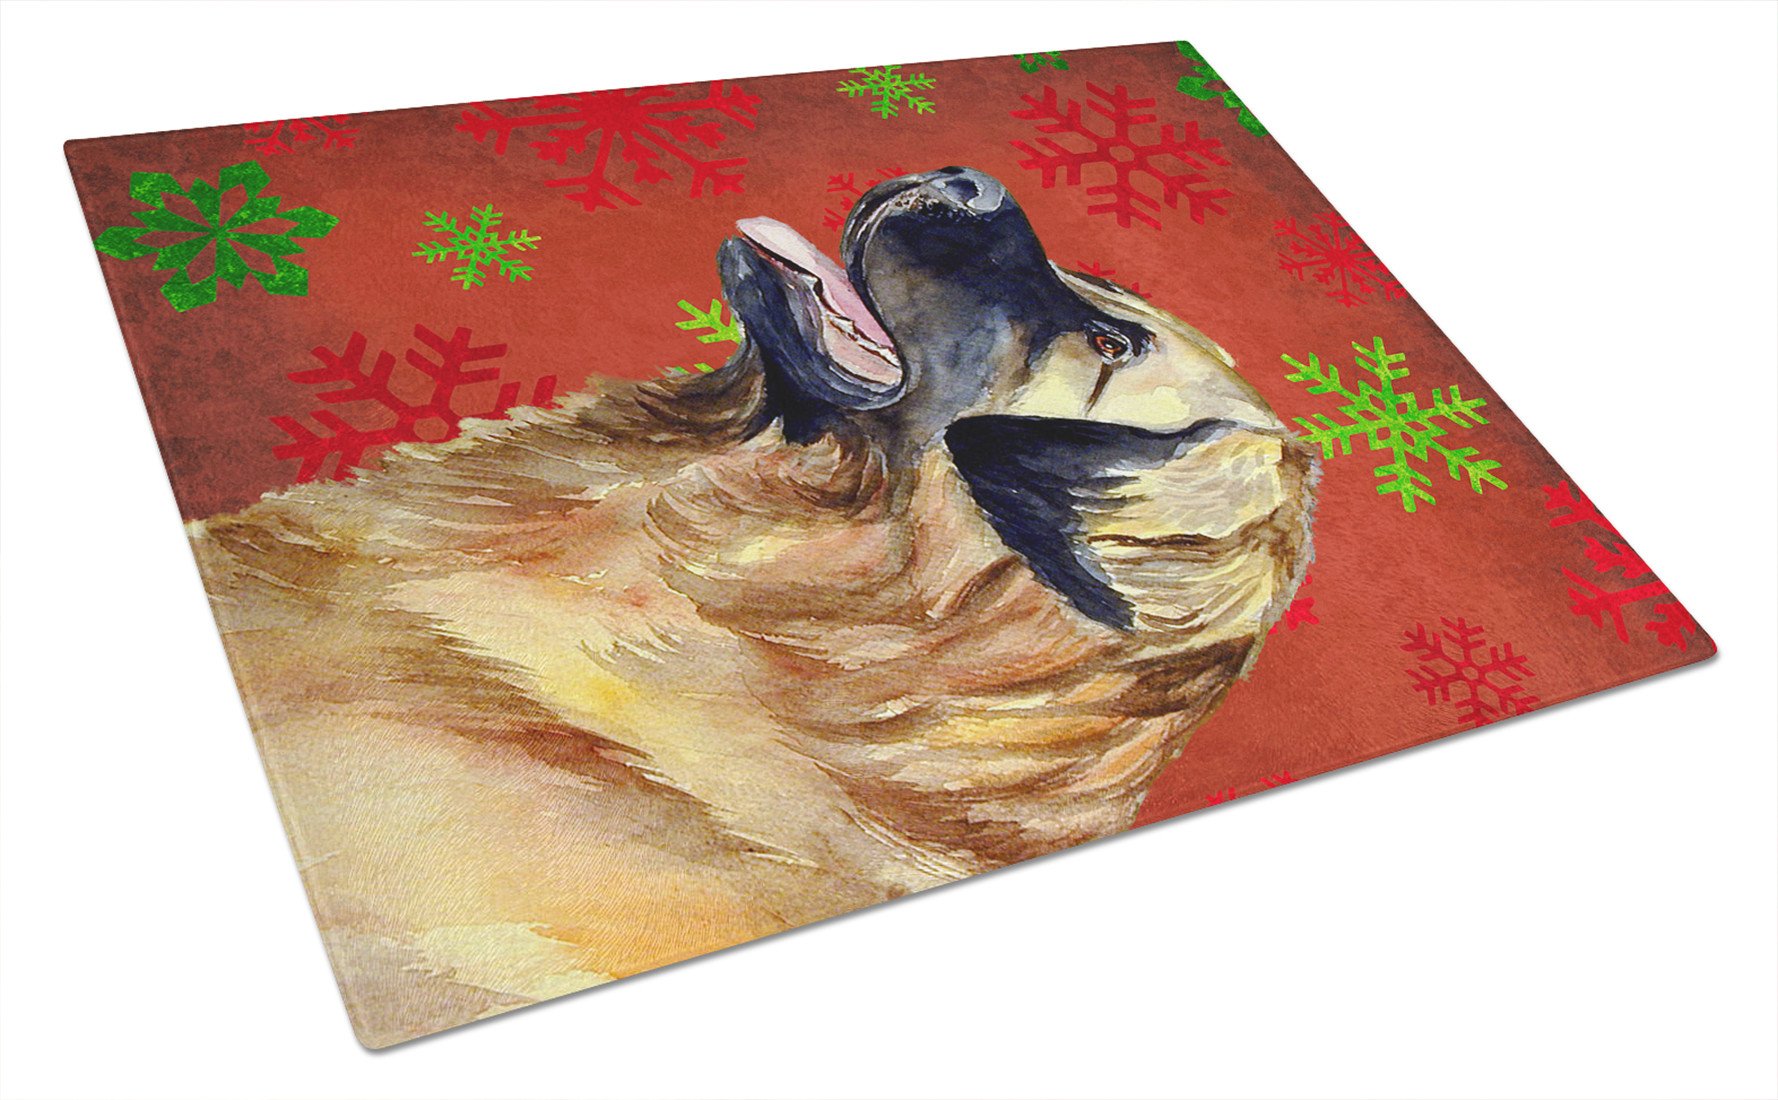 Leonberger Red and Green Snowflakes Holiday Christmas Glass Cutting Board Large by Caroline's Treasures